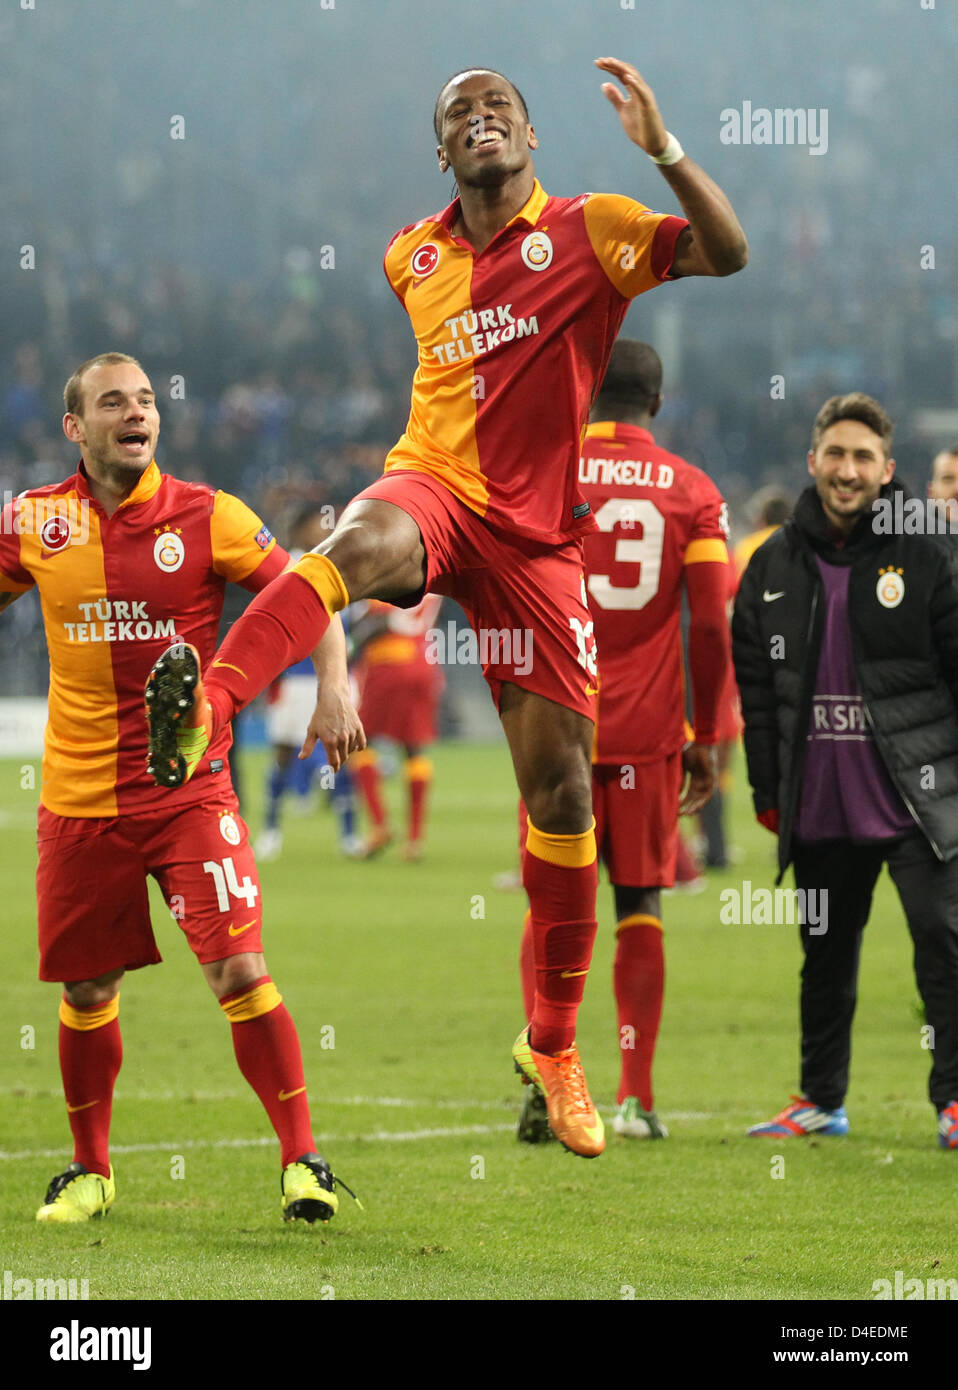 Gelsenkirchen, Germany. 12th March 2013. Wesley Sneijder (L-R) and Didier Drogba of Galatasaray Istanbul celebrate after winning the UEFA Champions League round of 16 second leg soccer match 3-2 against FC Schalke 04 at Stadion Gelsenkirchen, Gelsenkirchen. Photo: Friso Gentsch/dpa/Alamy Live News. +++(c) dpa/Alamy Live News. - Bildfunk+++ Stock Photo